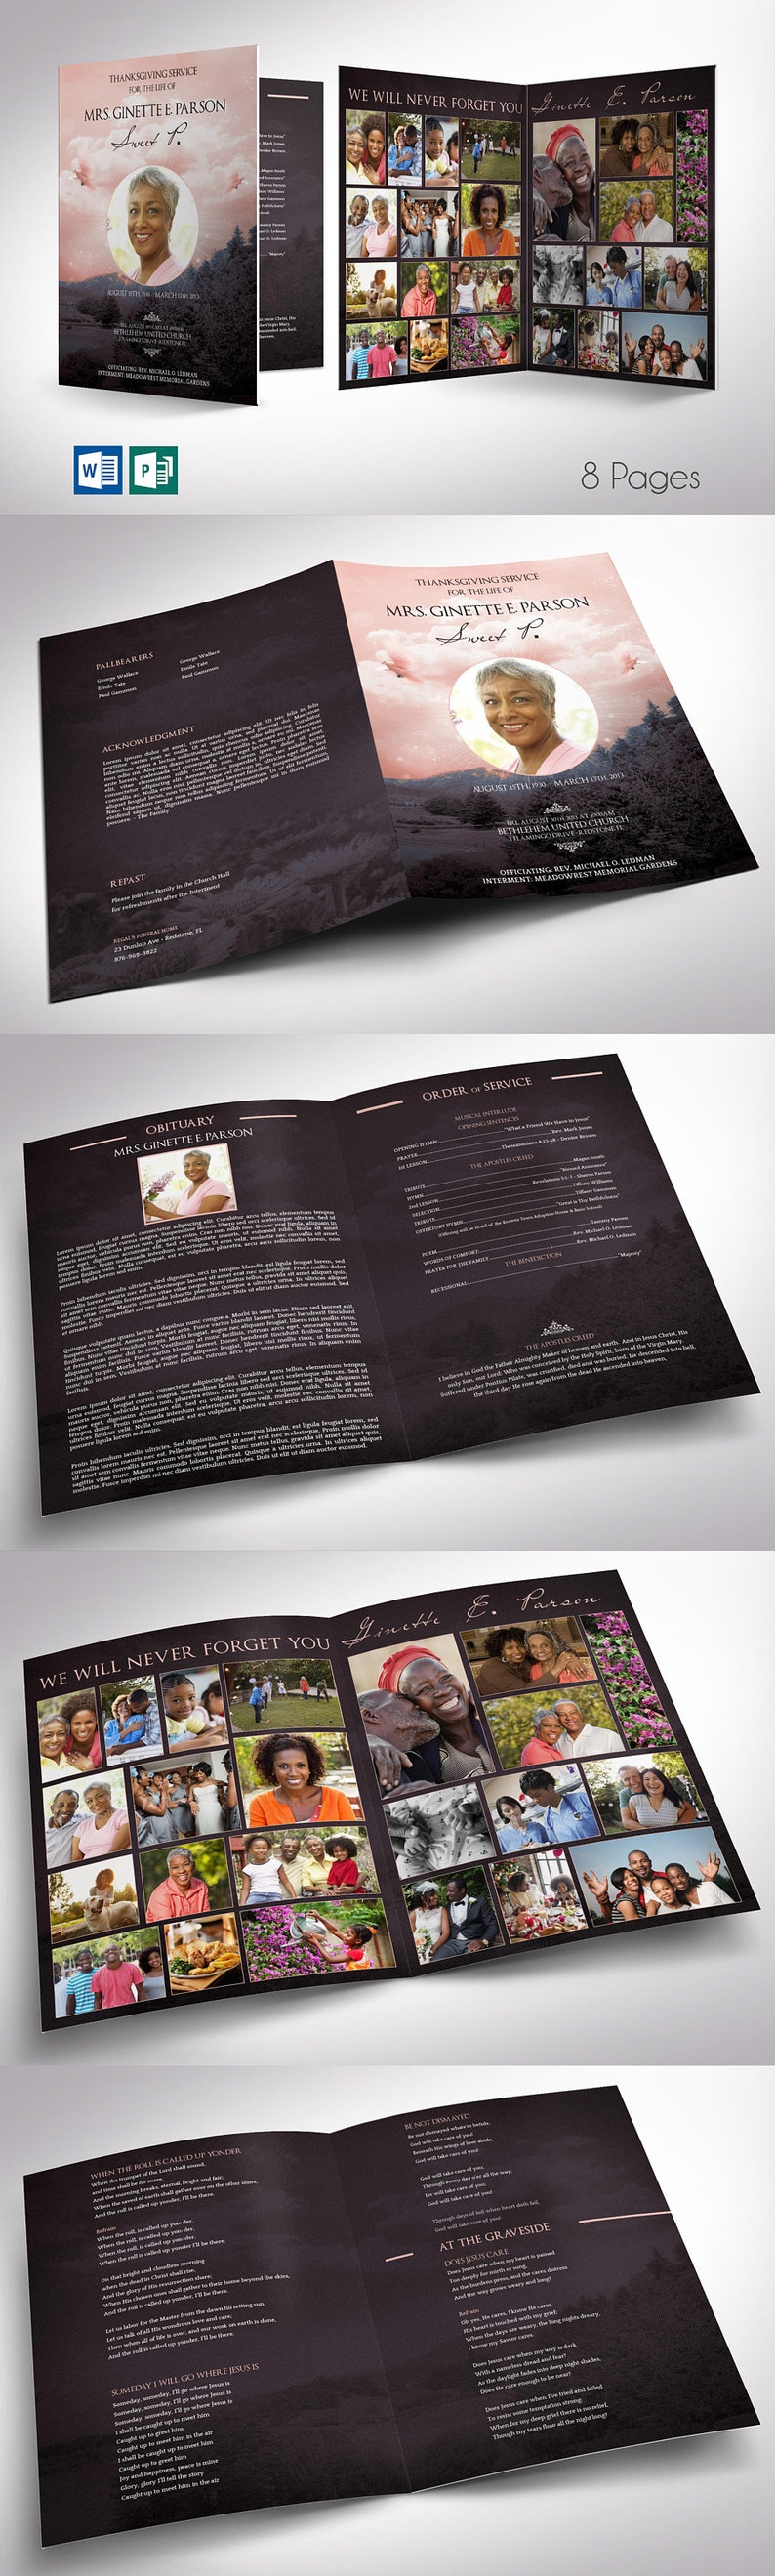 Peach Sky Tabloid Funeral Program Template Word Template, Publisher Celebration of Life 8 Pages 11x17 inches image 10